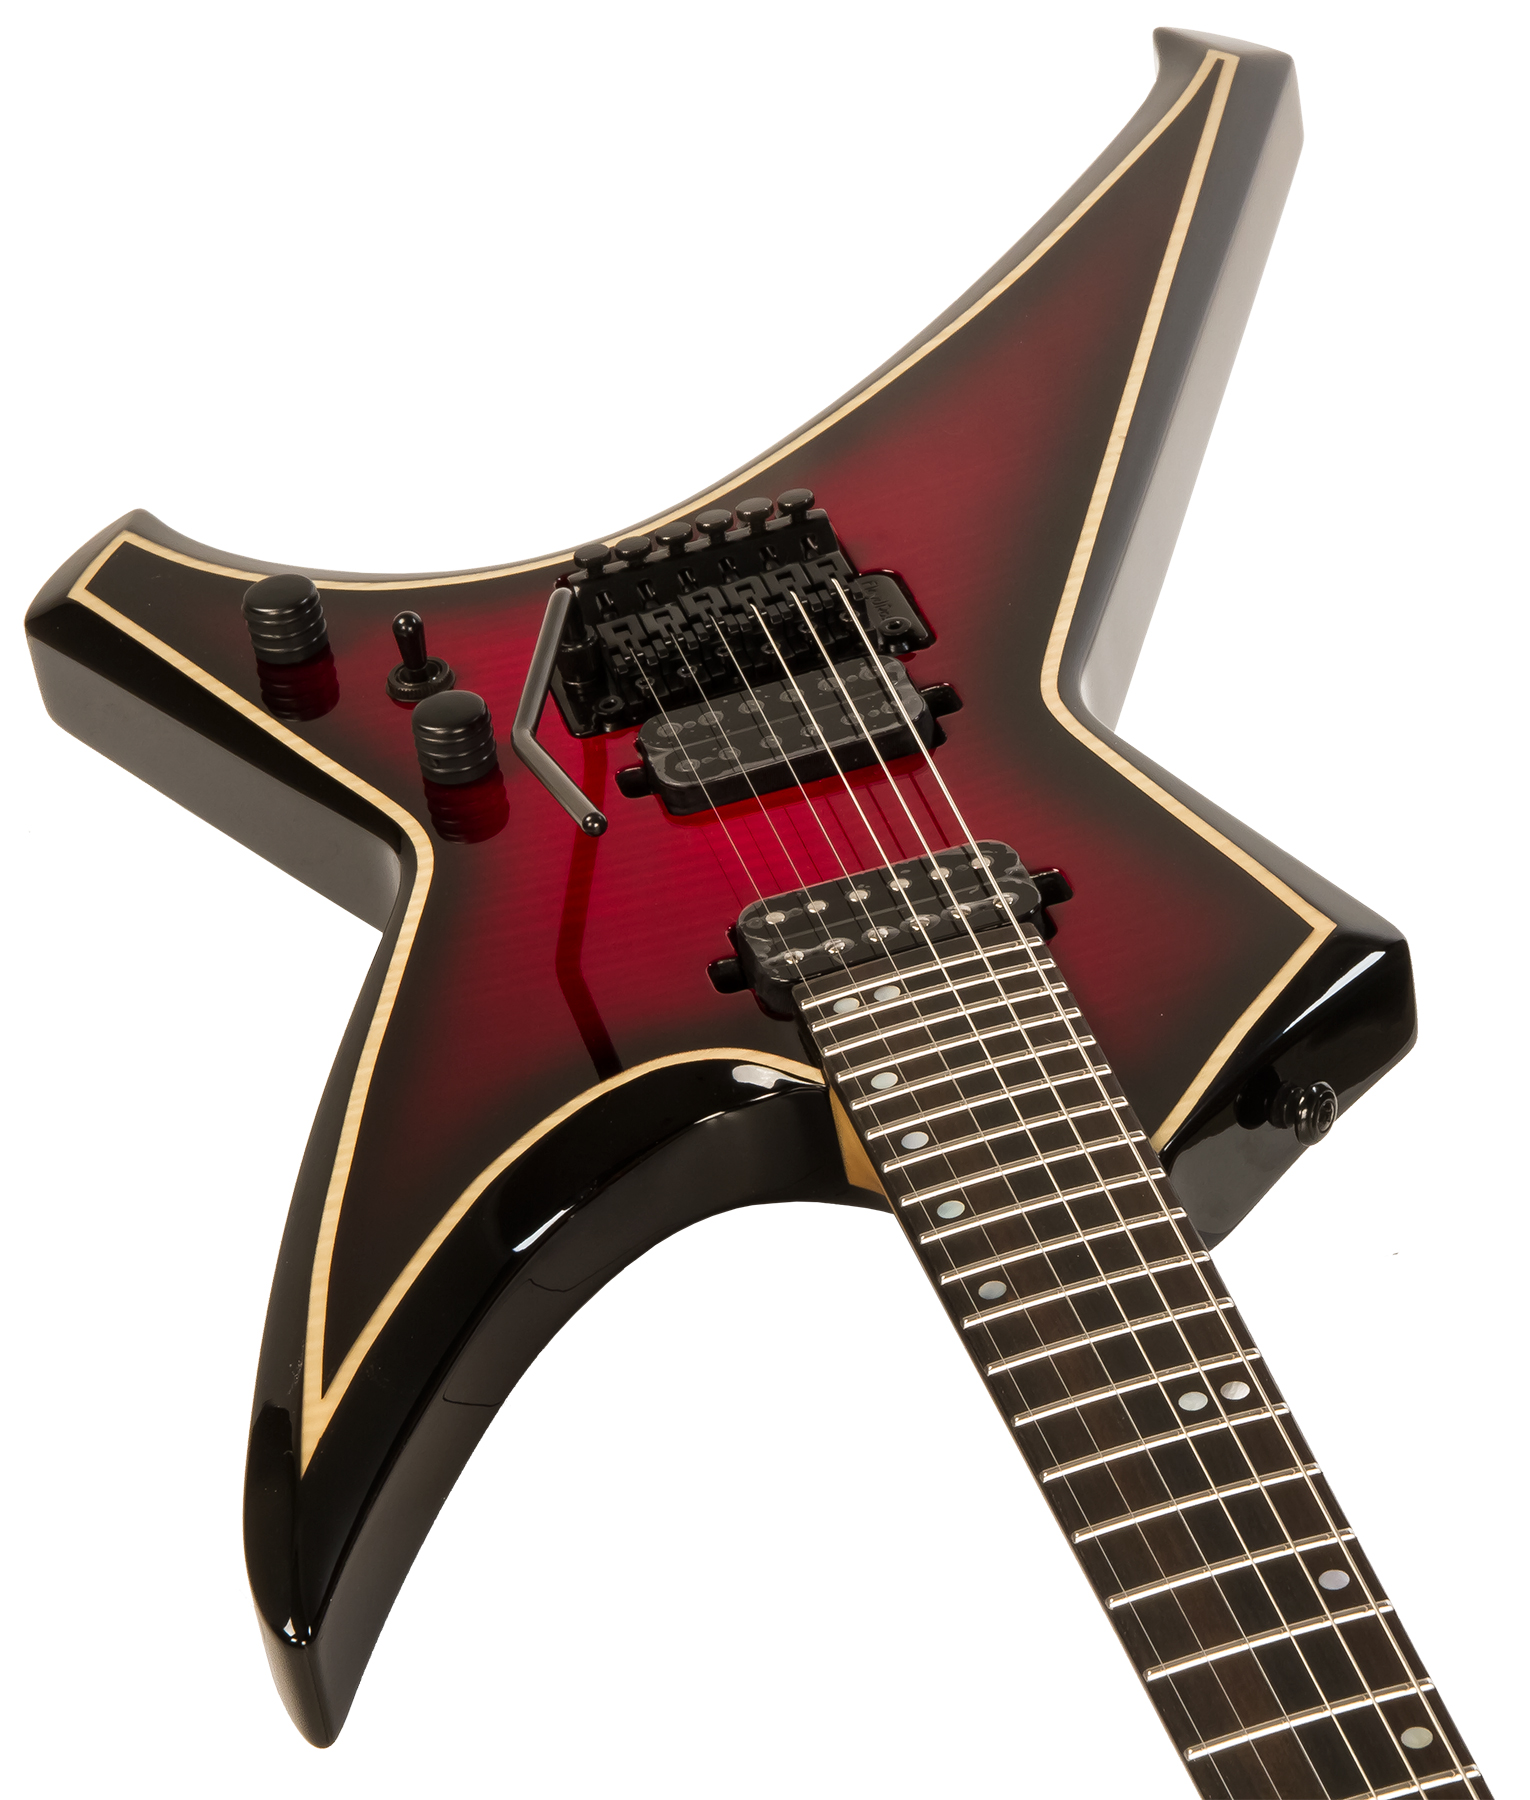 Ormsby Metal X 6 Hh Fr Eb - Red Dead - Guitarra electrica metalica - Variation 2